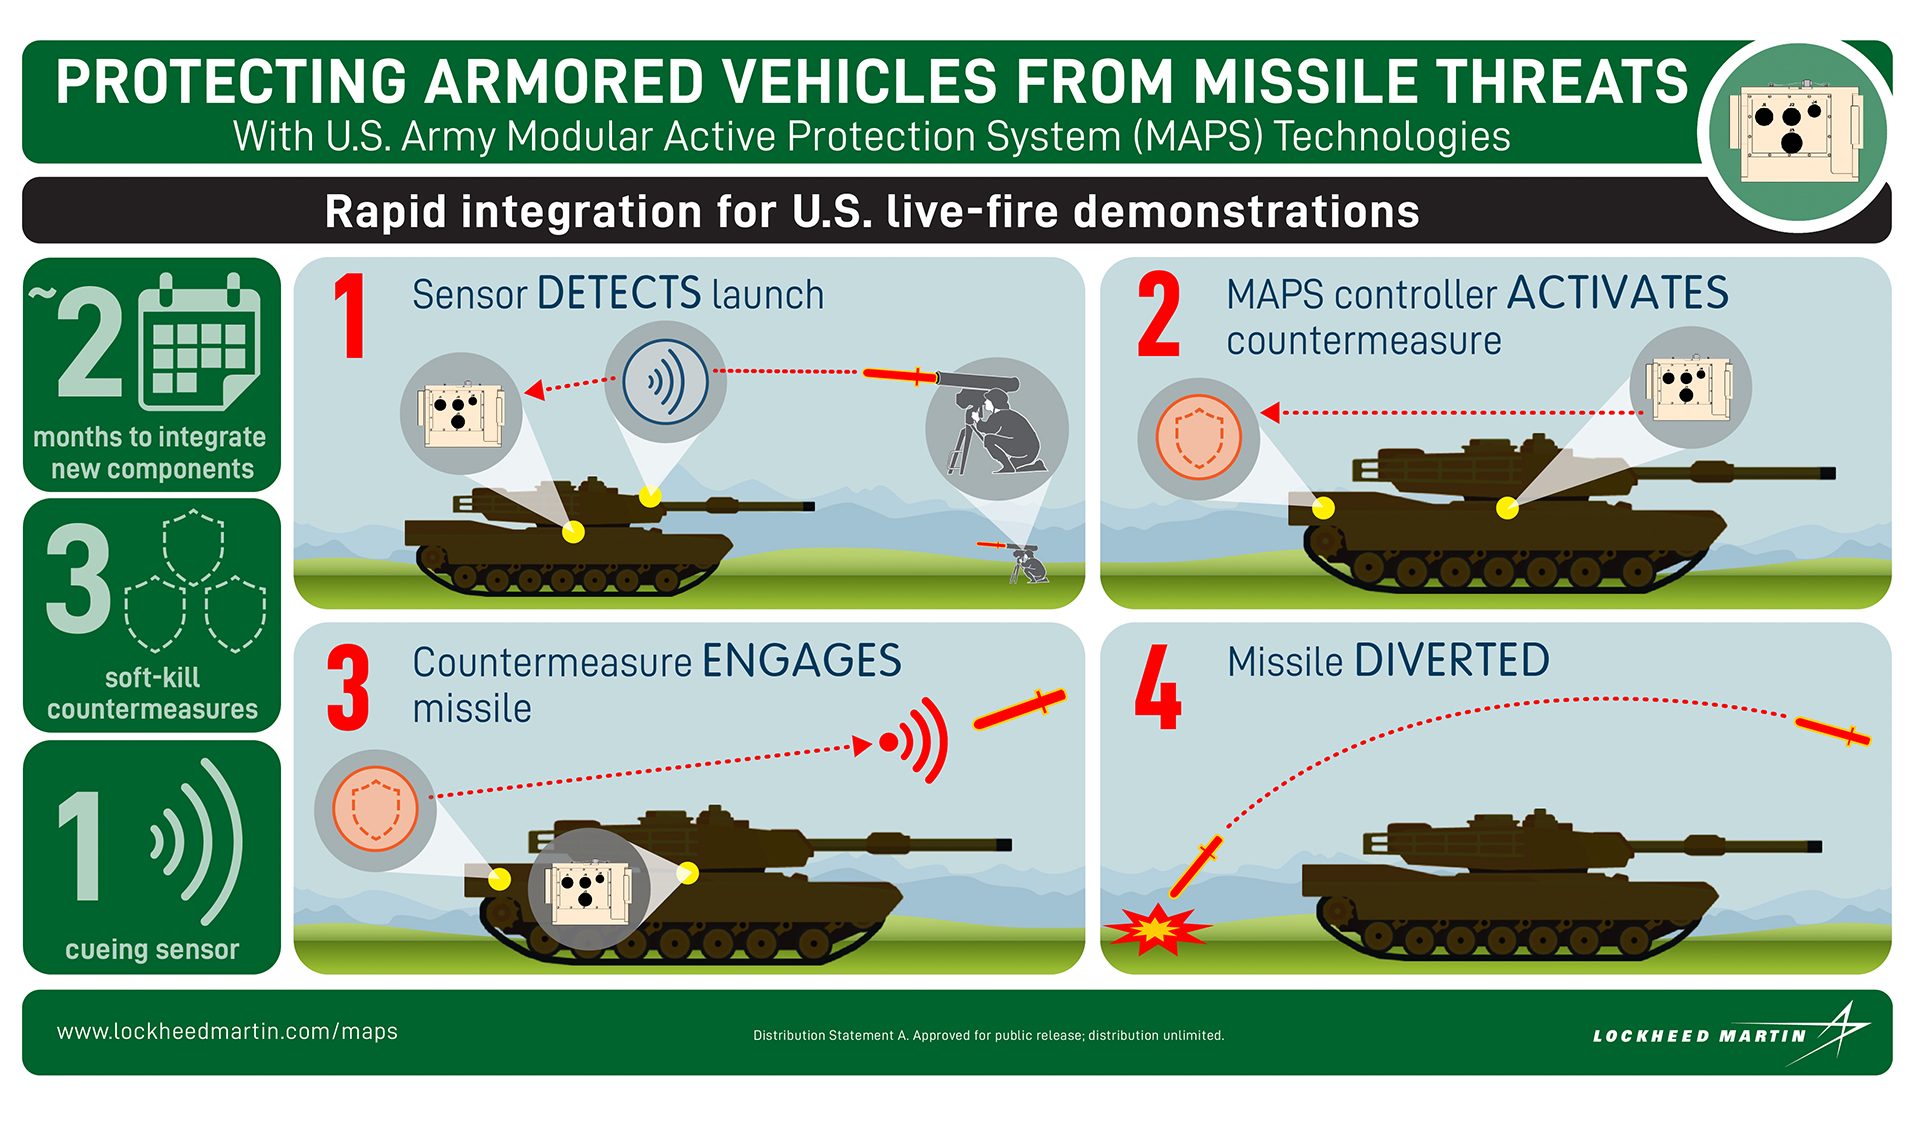  U.S. Army's Modular Active Protection System (MAPS) 